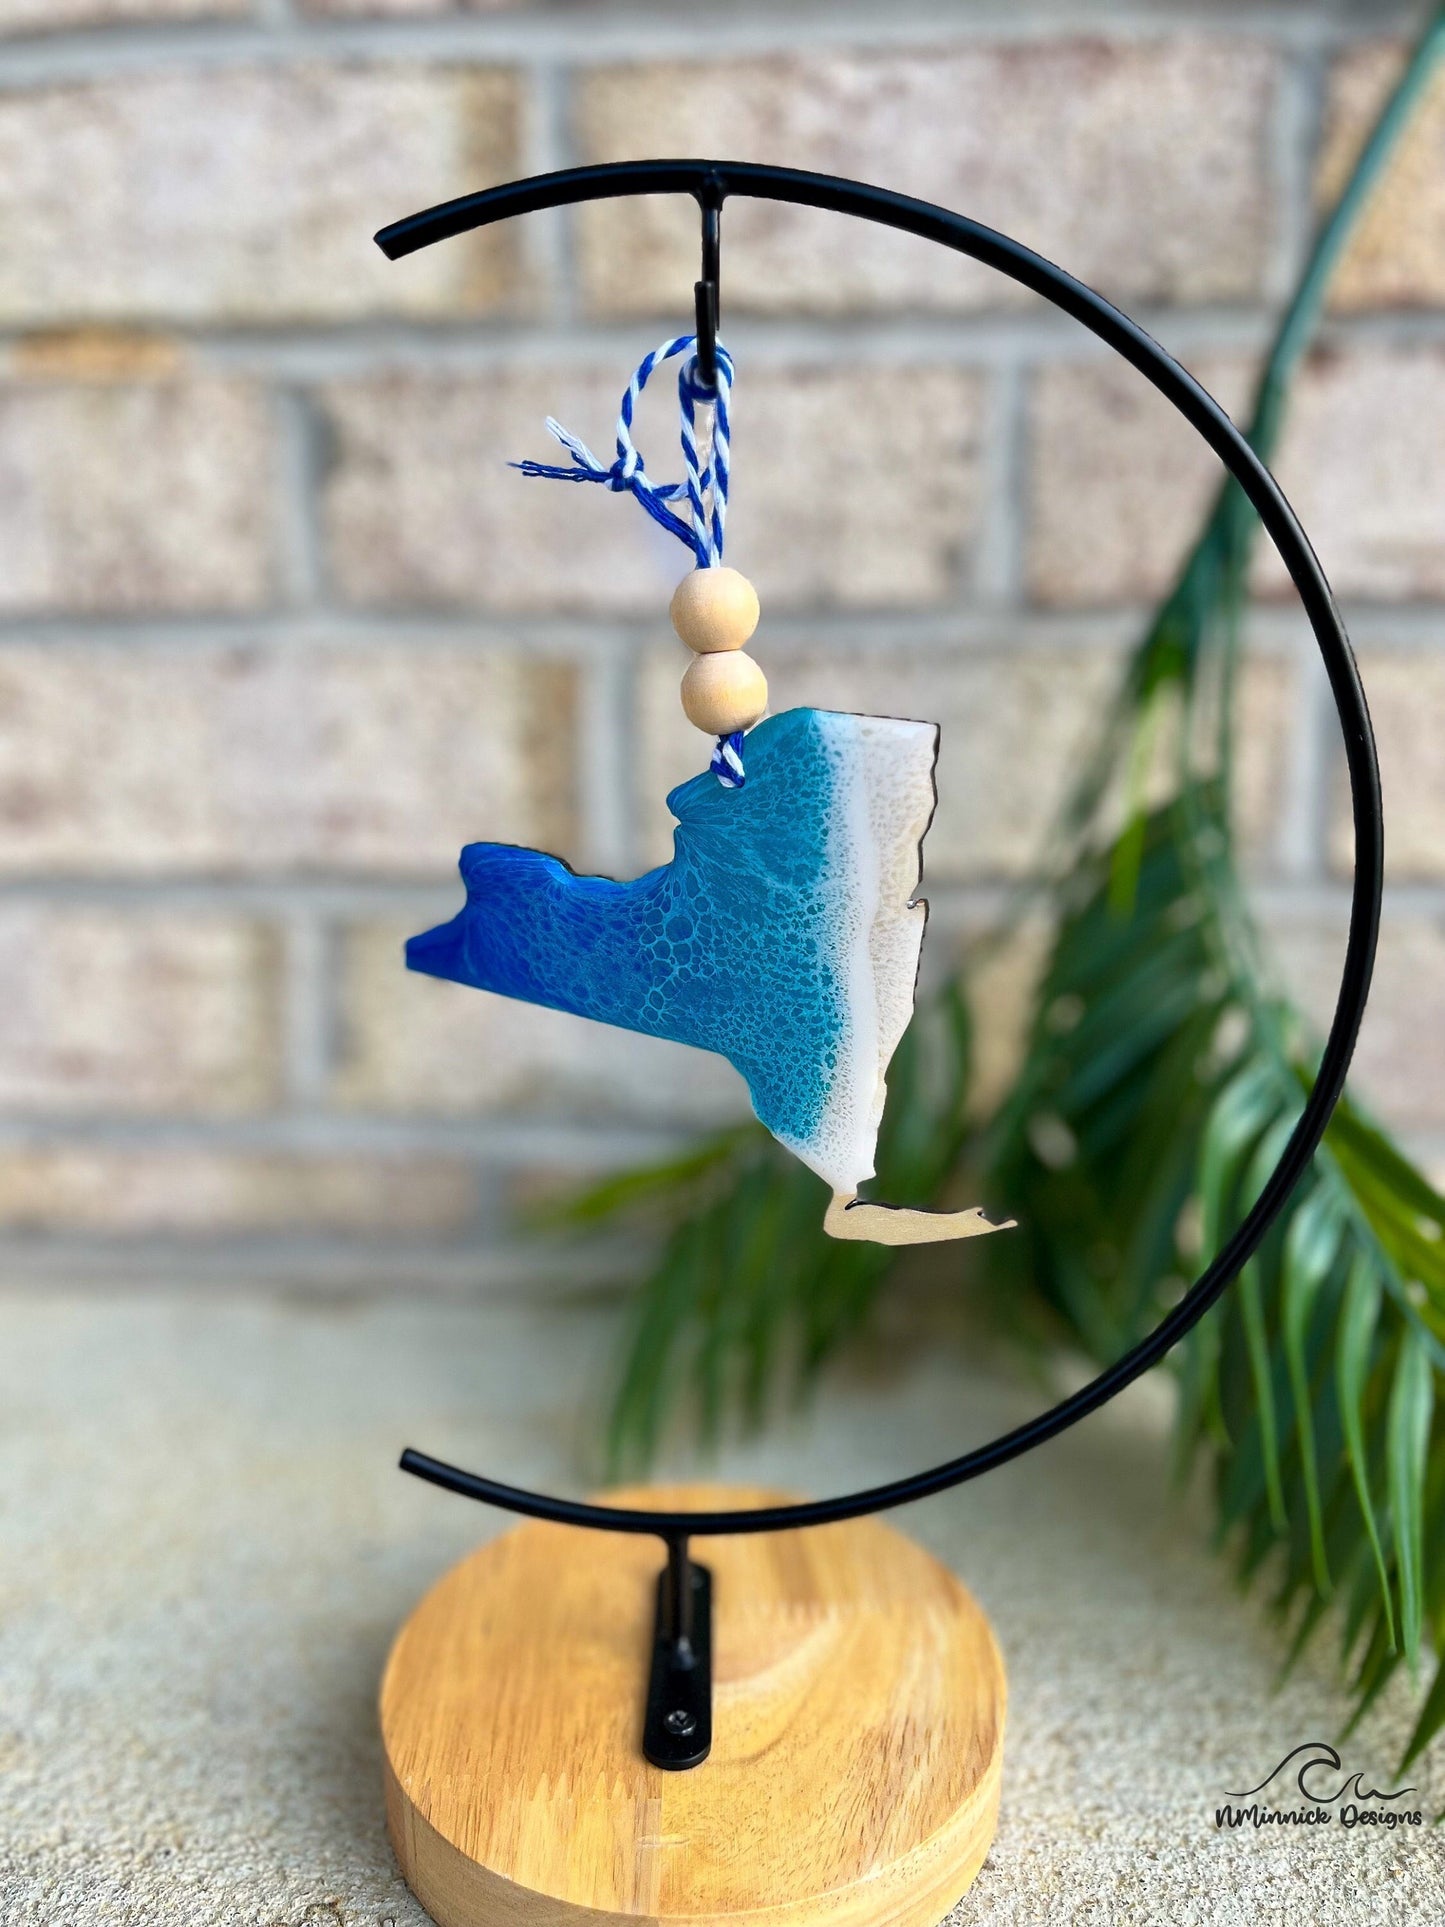 New York beach ornament with ocean wave art hanging from an ornament stand.